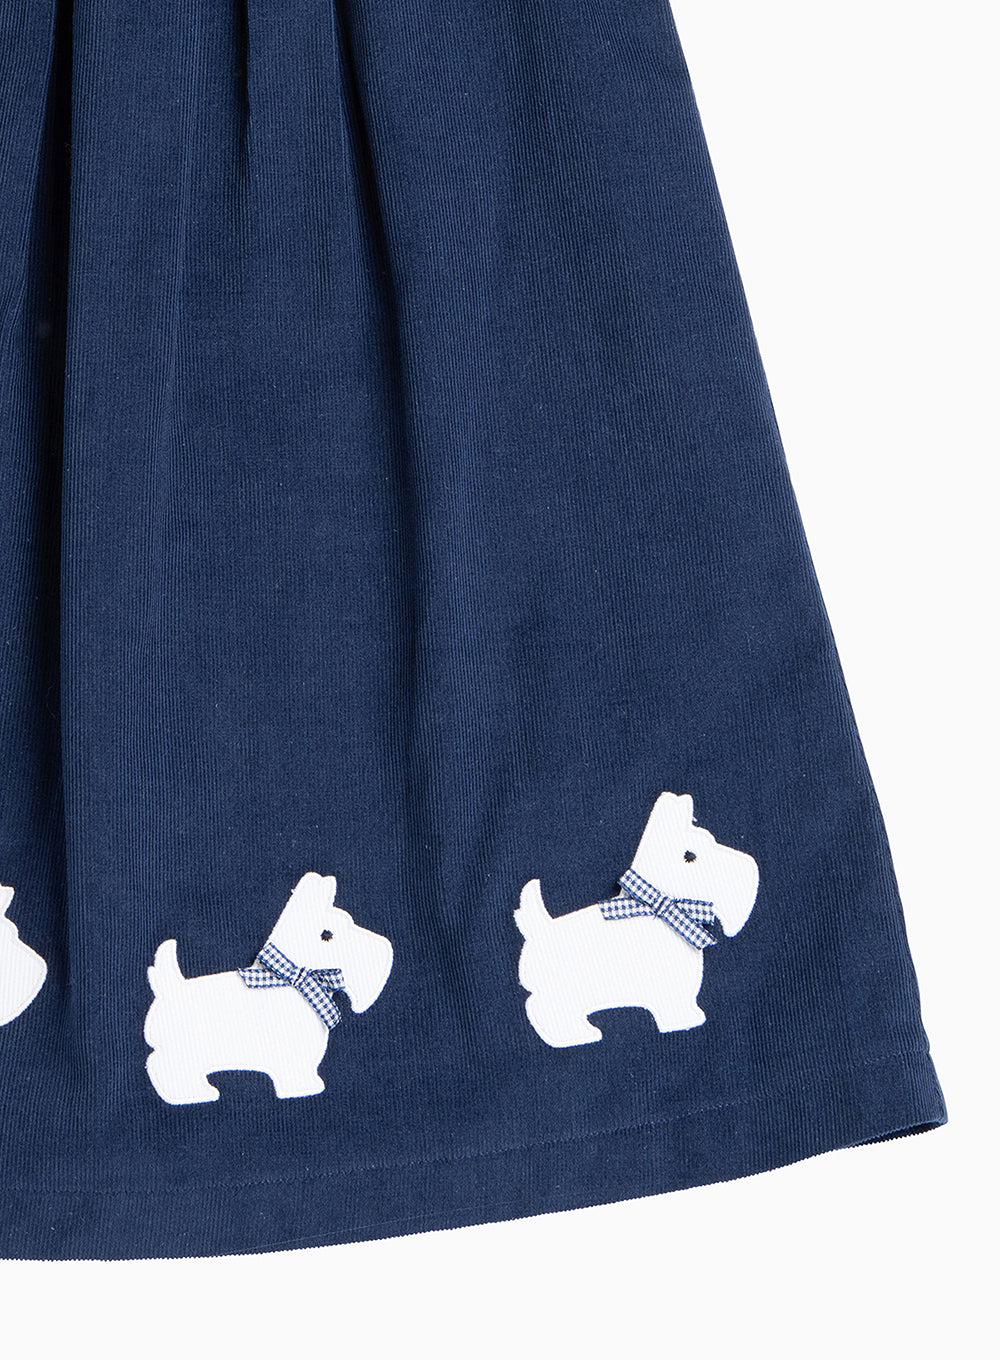 Girls Scottie Cord Pinafore in Navy Cord | Trotters Childrenswear